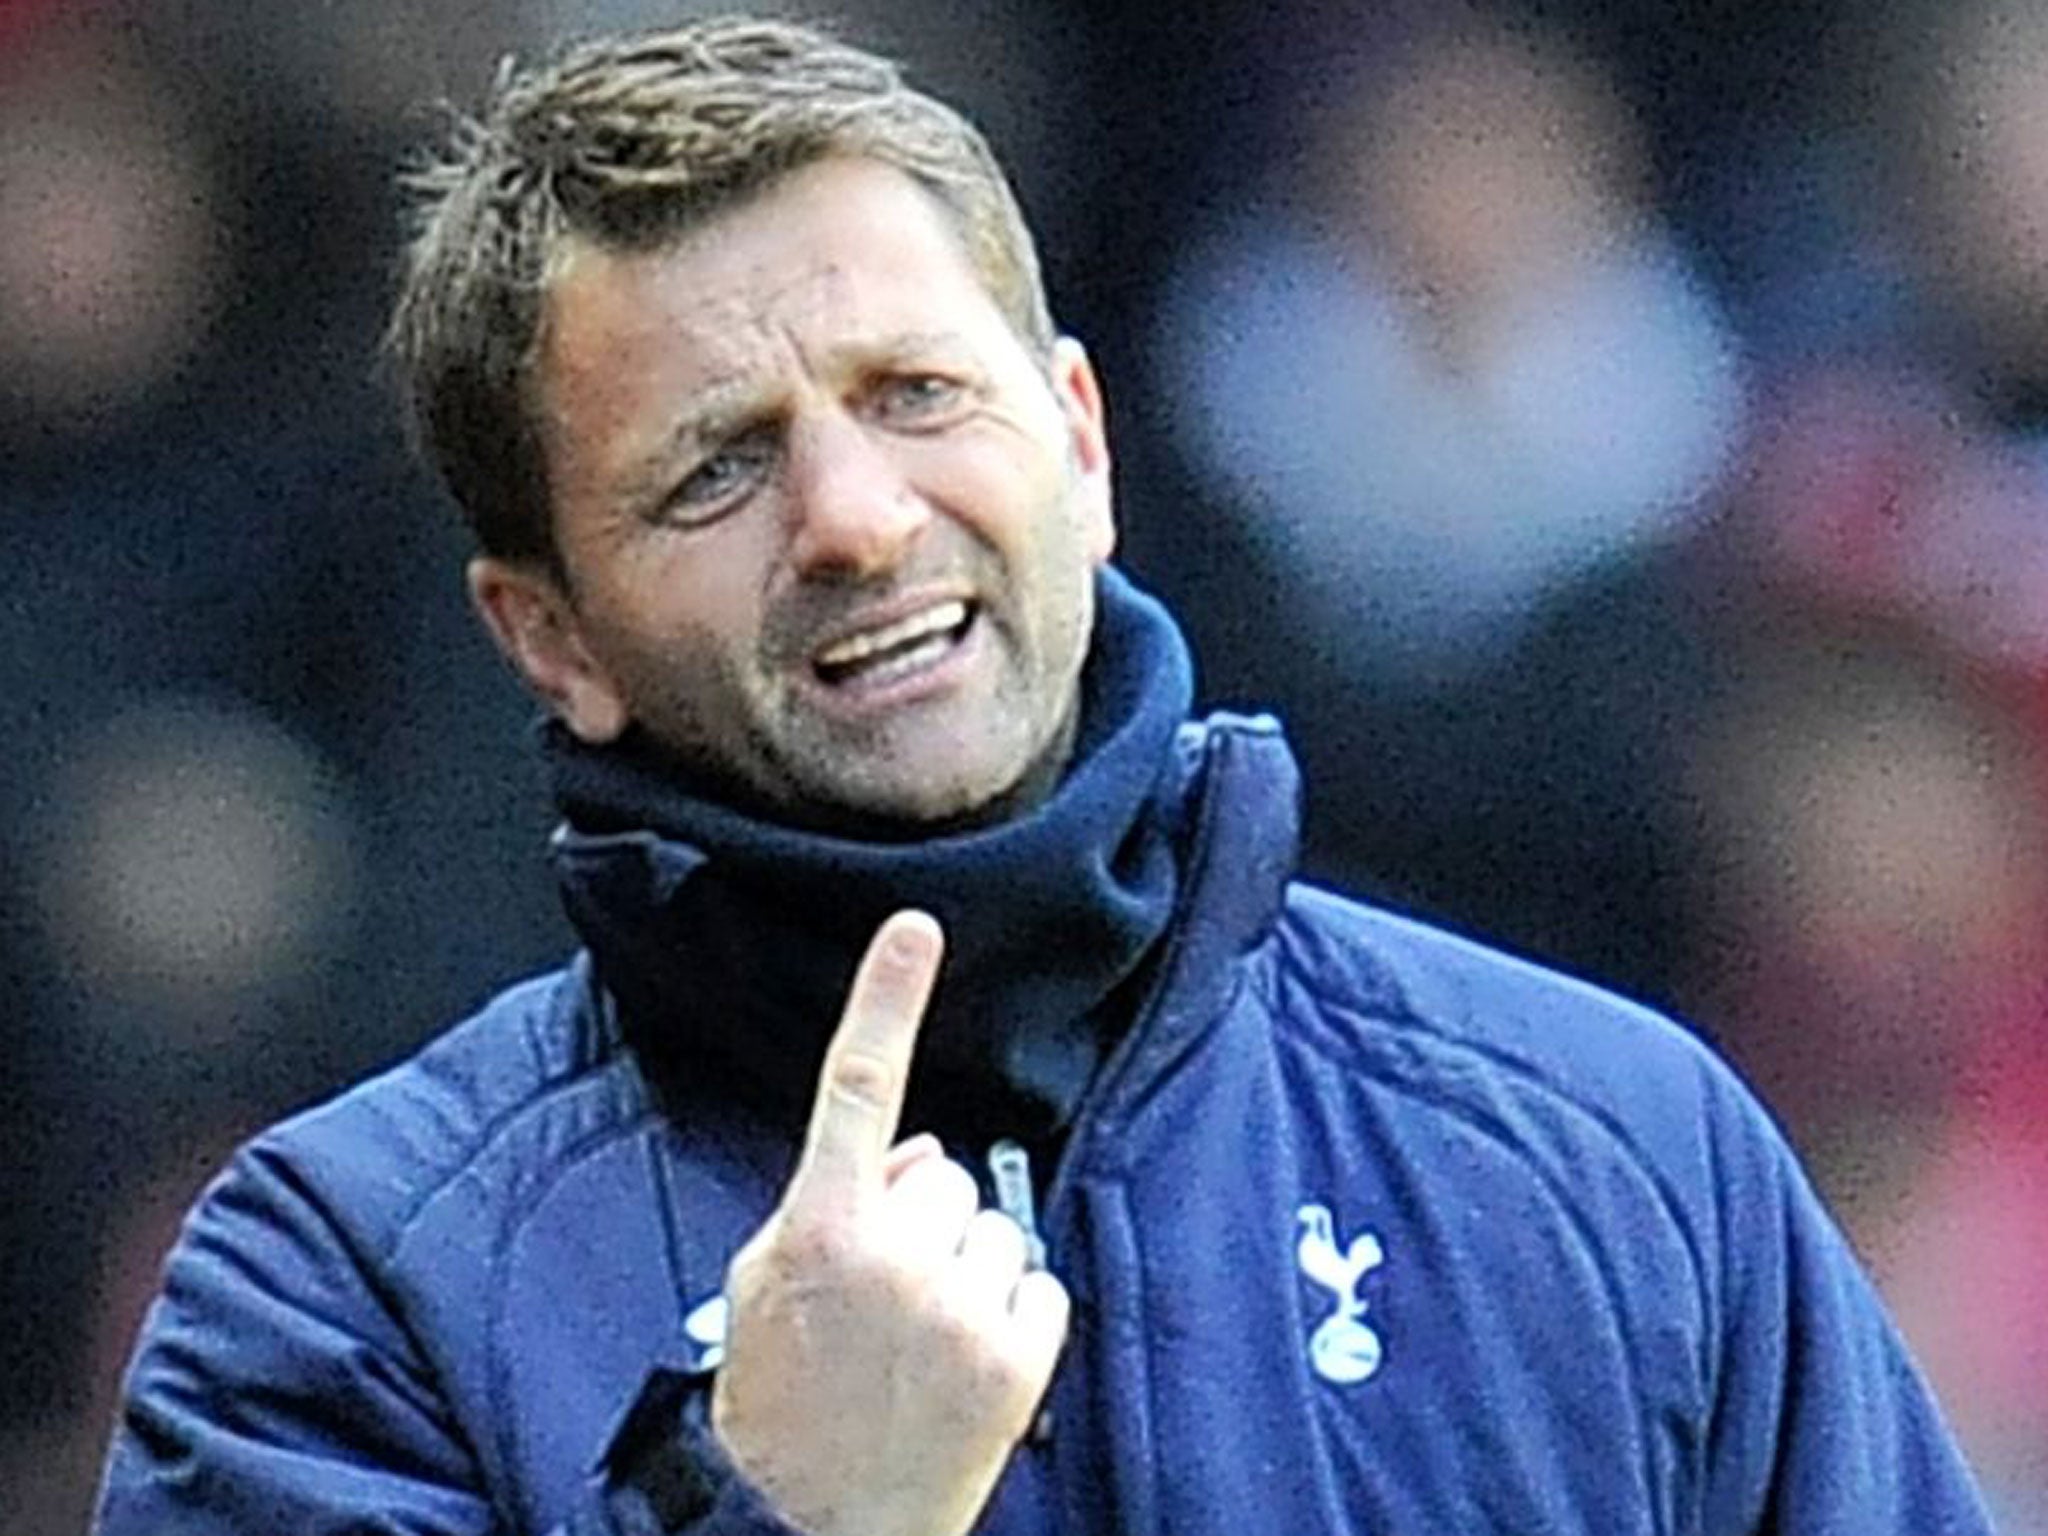 Tim Sherwood has been dismissed by some for his lack of experience but has excelled working with Spurs’ Under-21 side and oversaw an excellent win at Southampton on Sunday